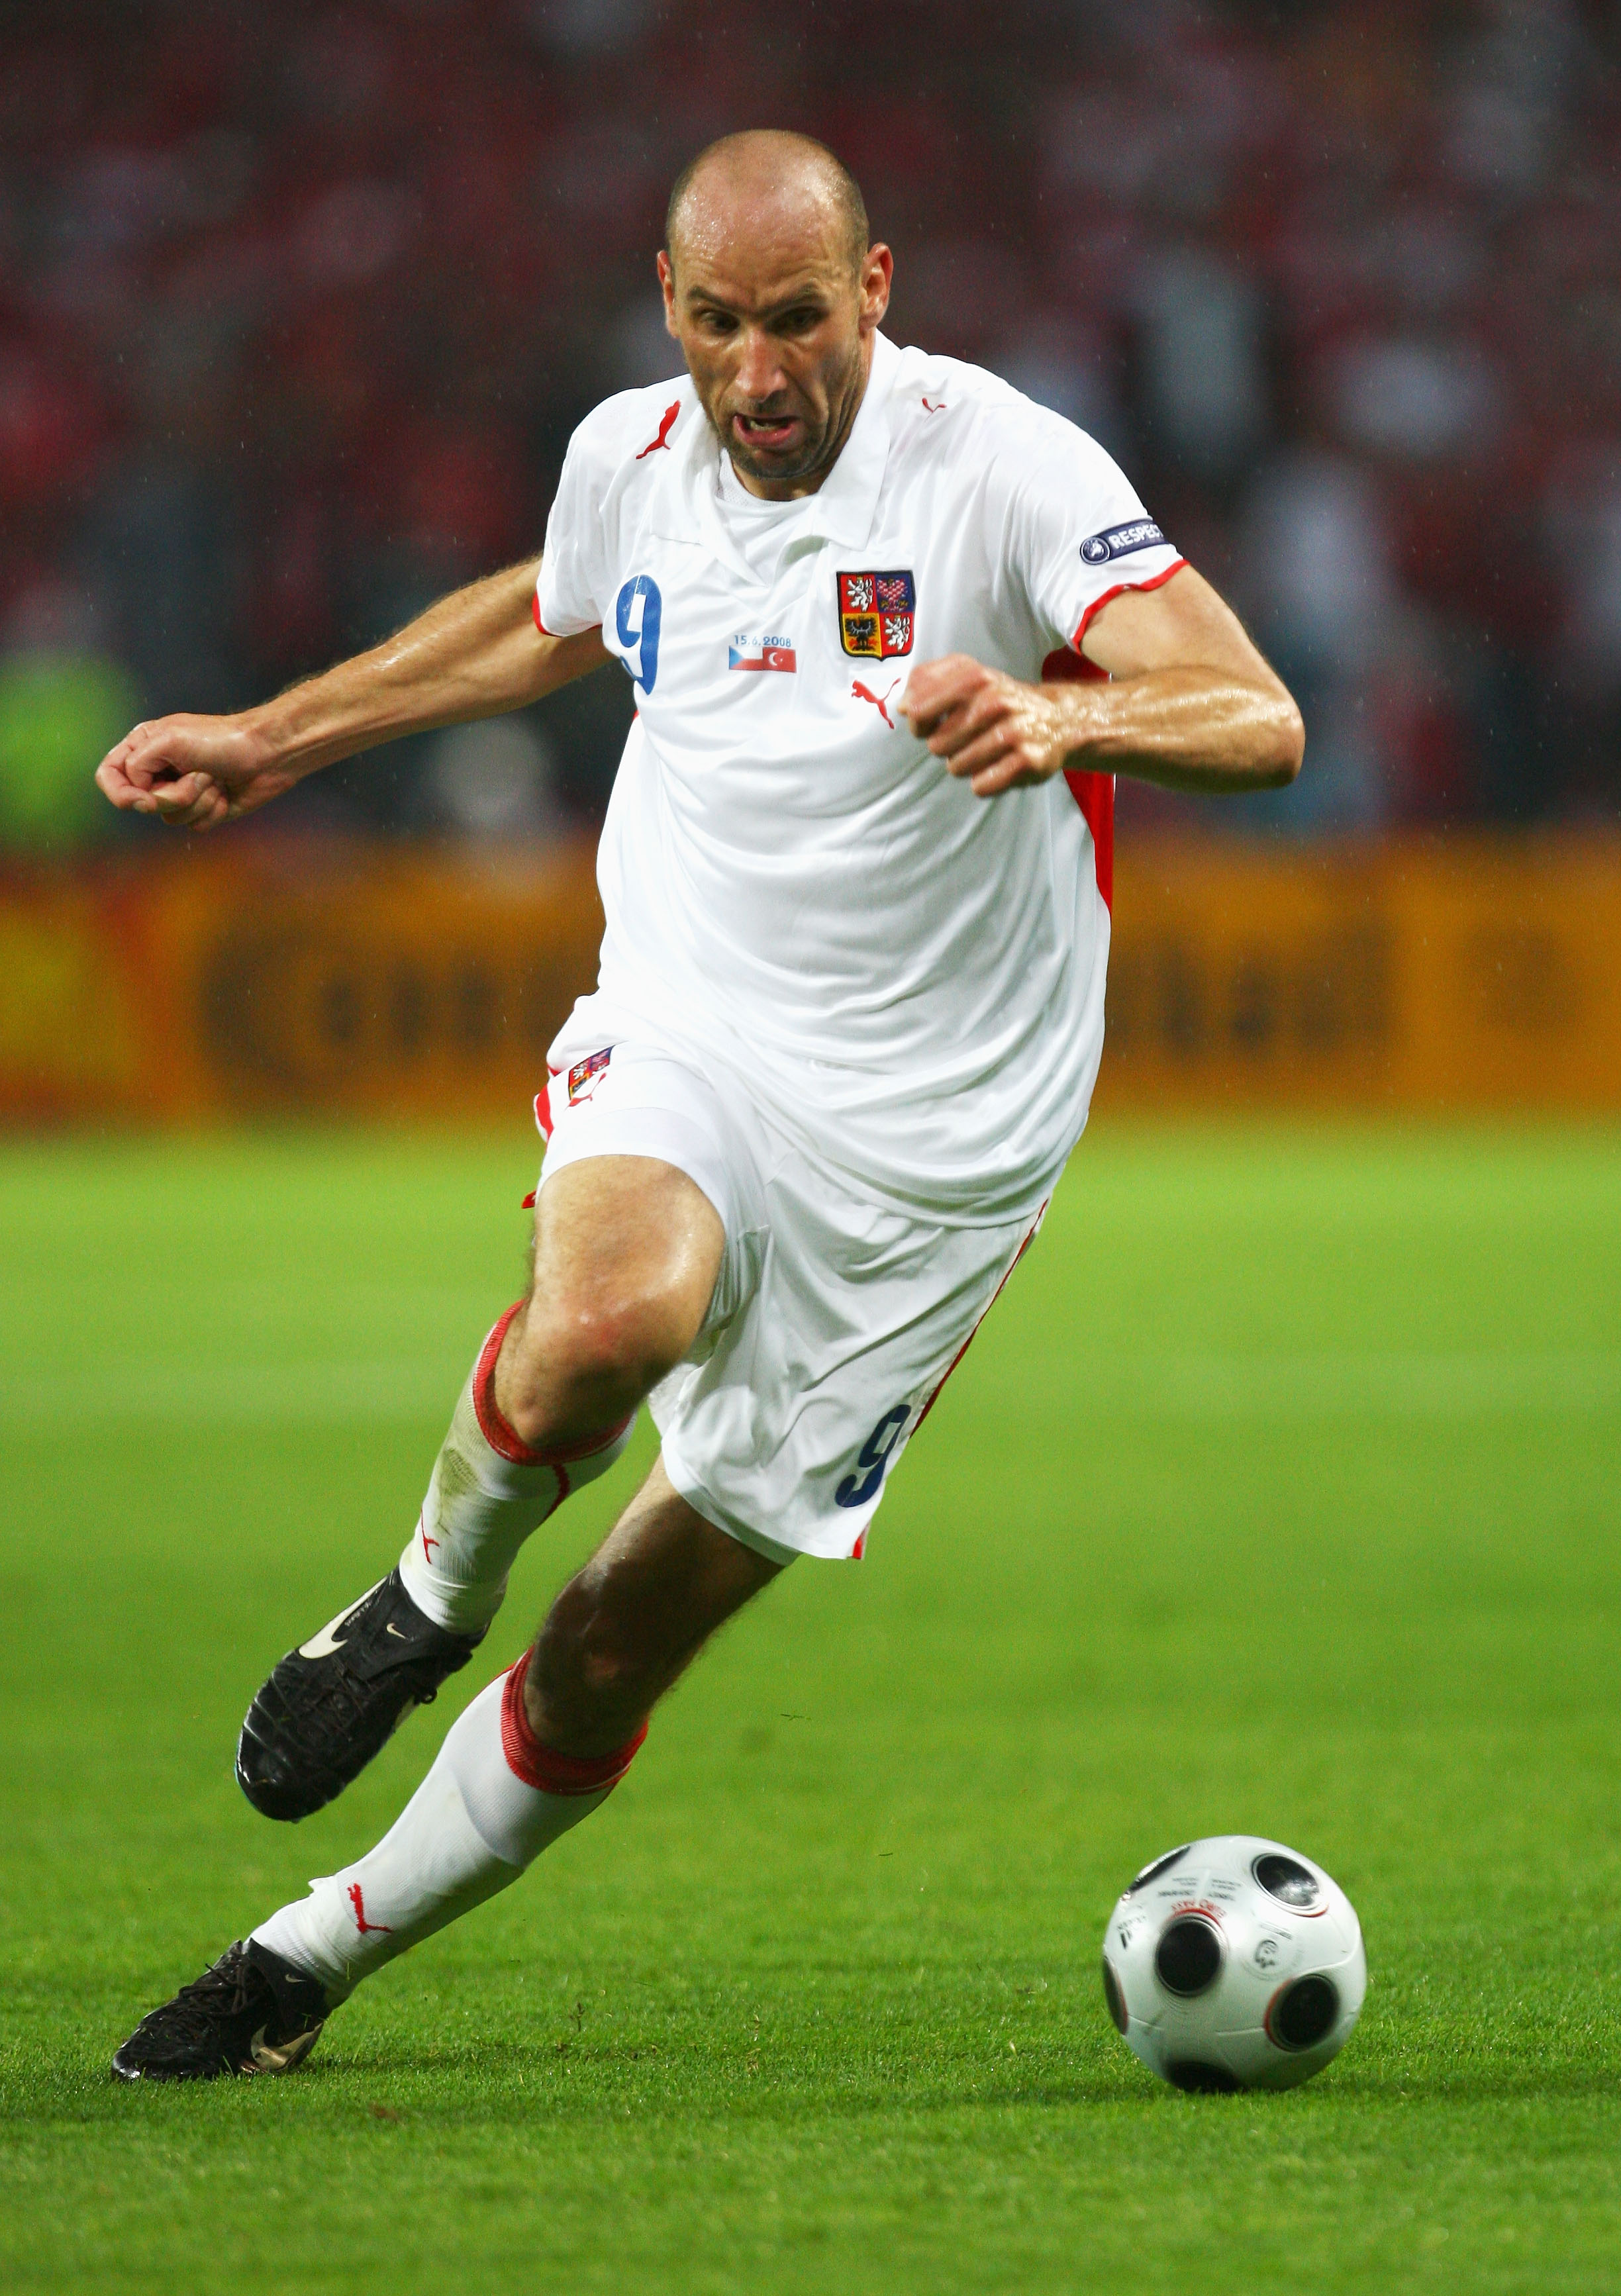 GENEVA - JUNE 15: Jan Koller of Czech Republic runs with the ball during the UEFA EURO 2008 Group A match between Turkey and Czech Republic at Stade de Geneve on June 15, 2008 in Geneva, Switzerland.  (Photo by Laurence Griffiths/Getty Images)